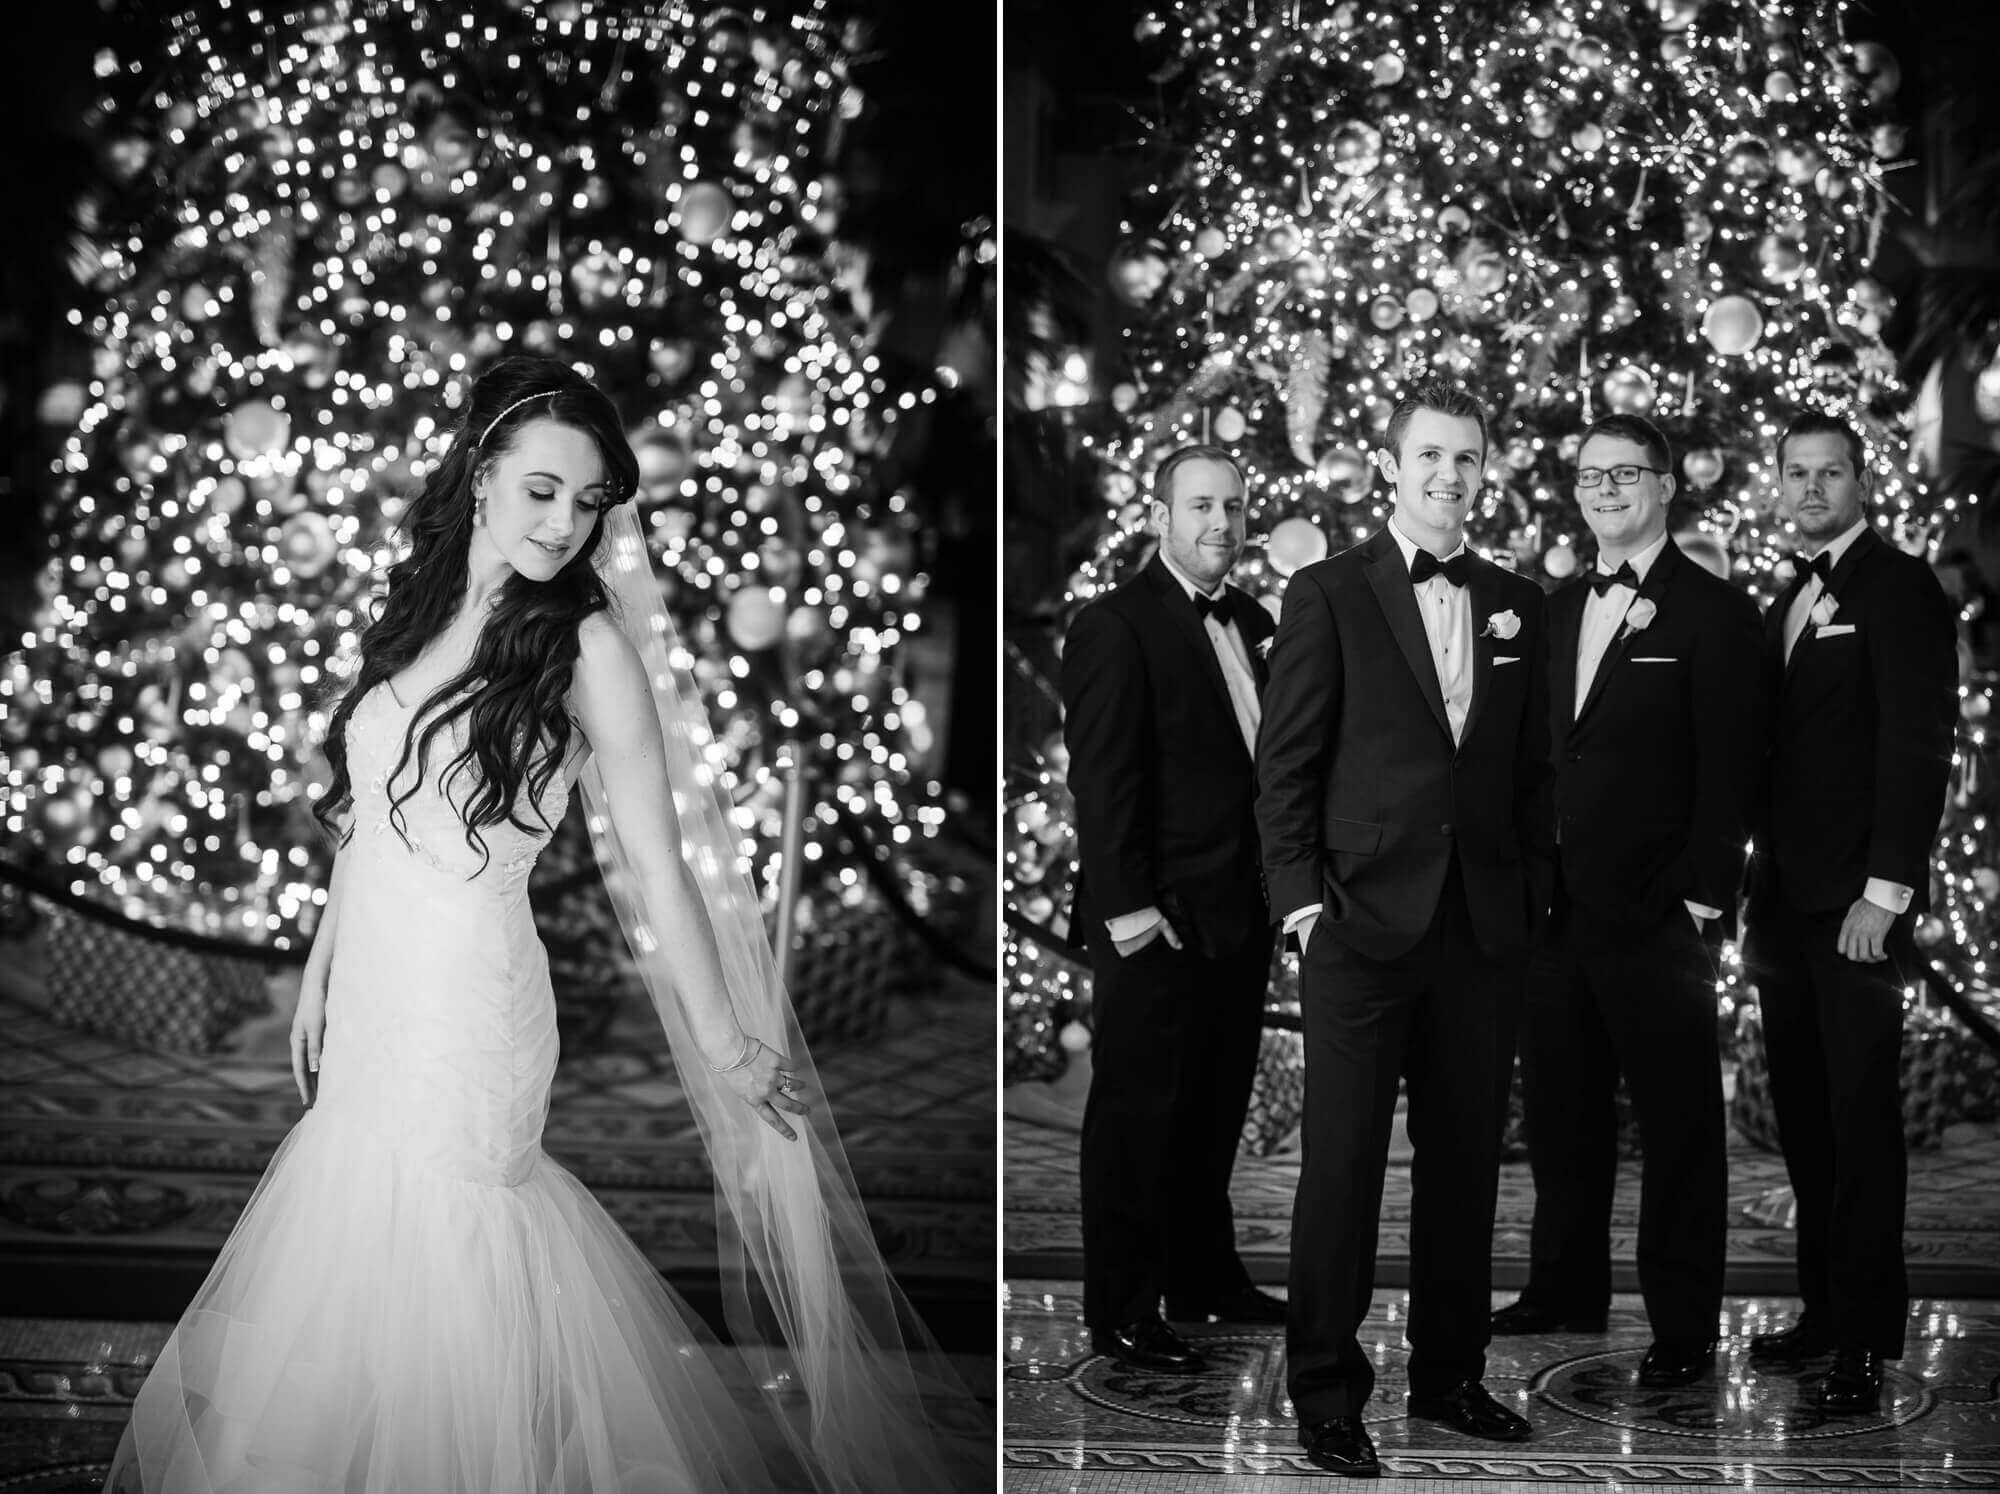 Stunning black and white portrait of the bride showing off her wedding dress in front of the Fairmont Royal York Christmas tree, in Toronto